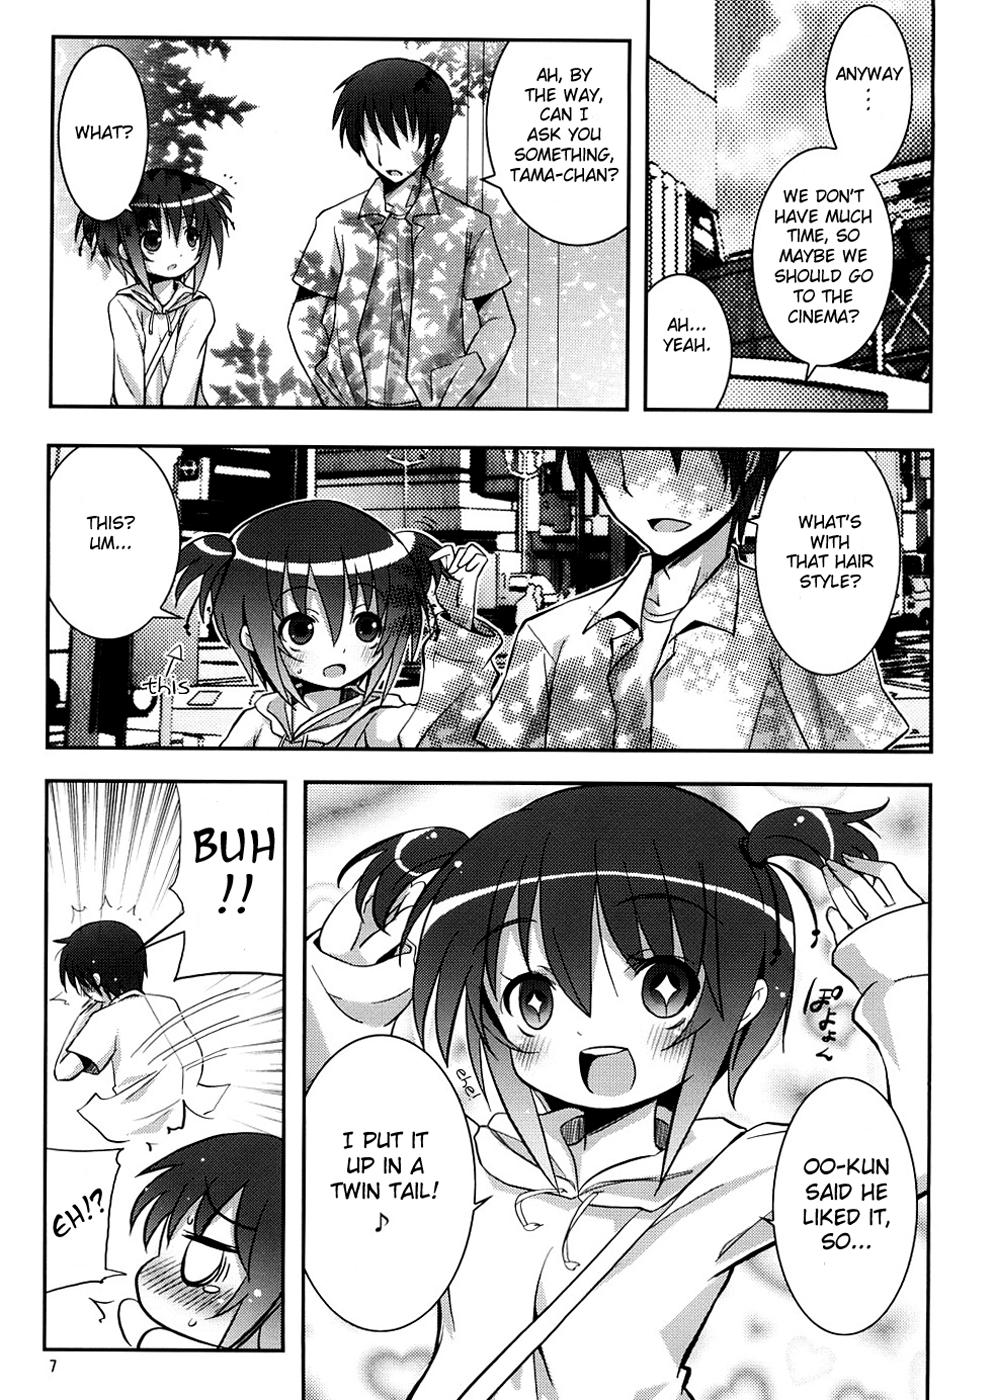 Fitness Tama-chan to Date. - Bamboo blade Handsome - Page 6